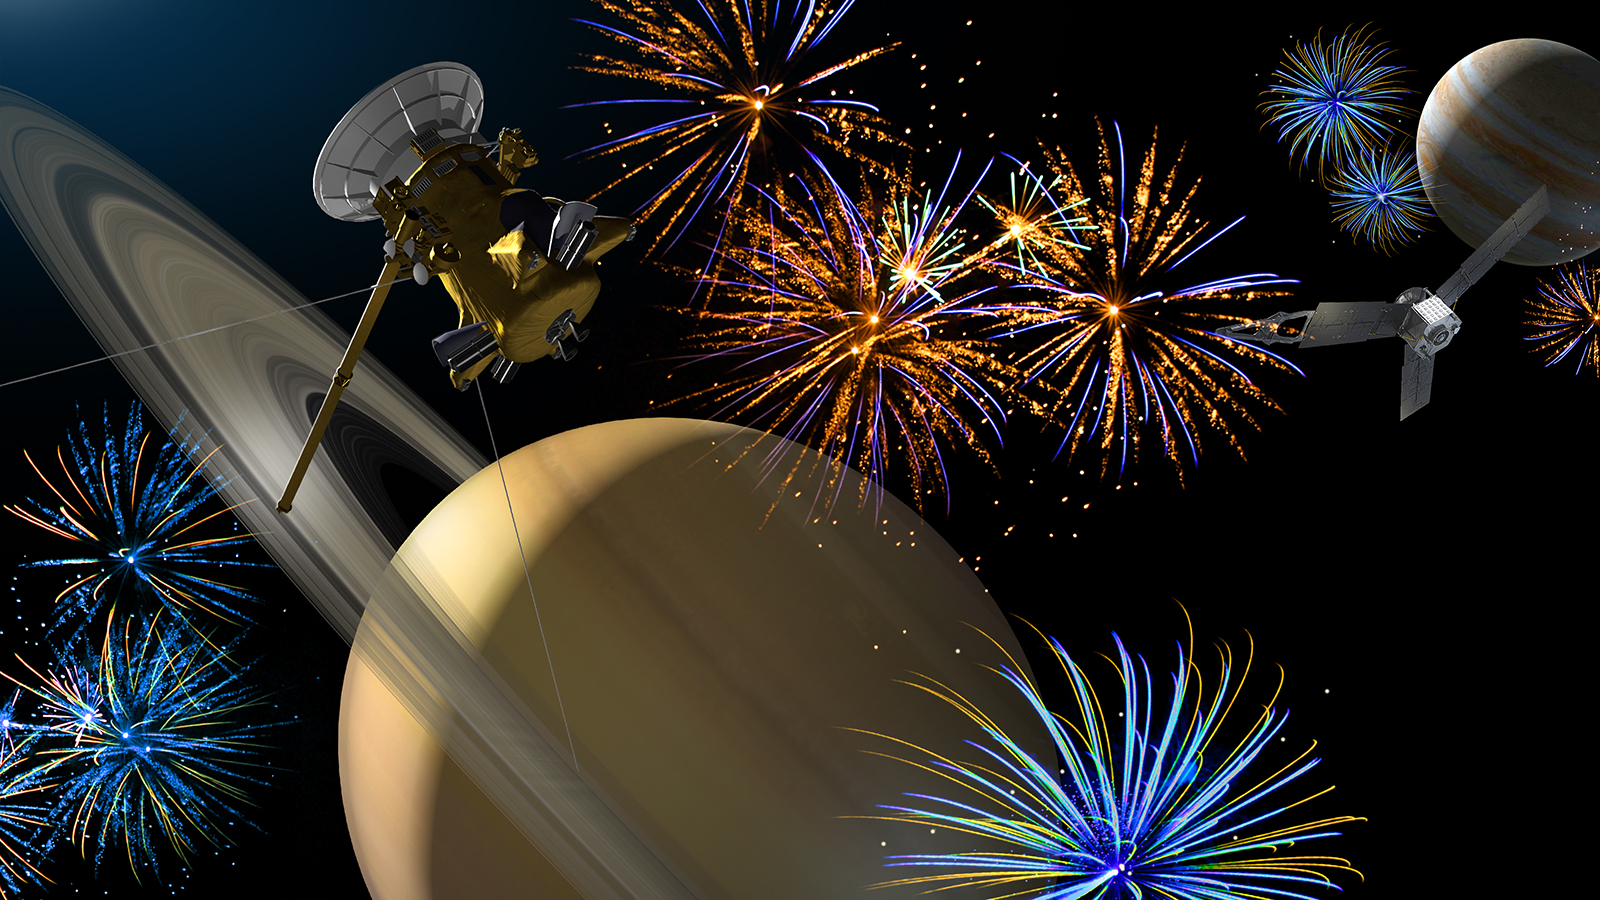 Saturn illustrated with fourth of July themes.